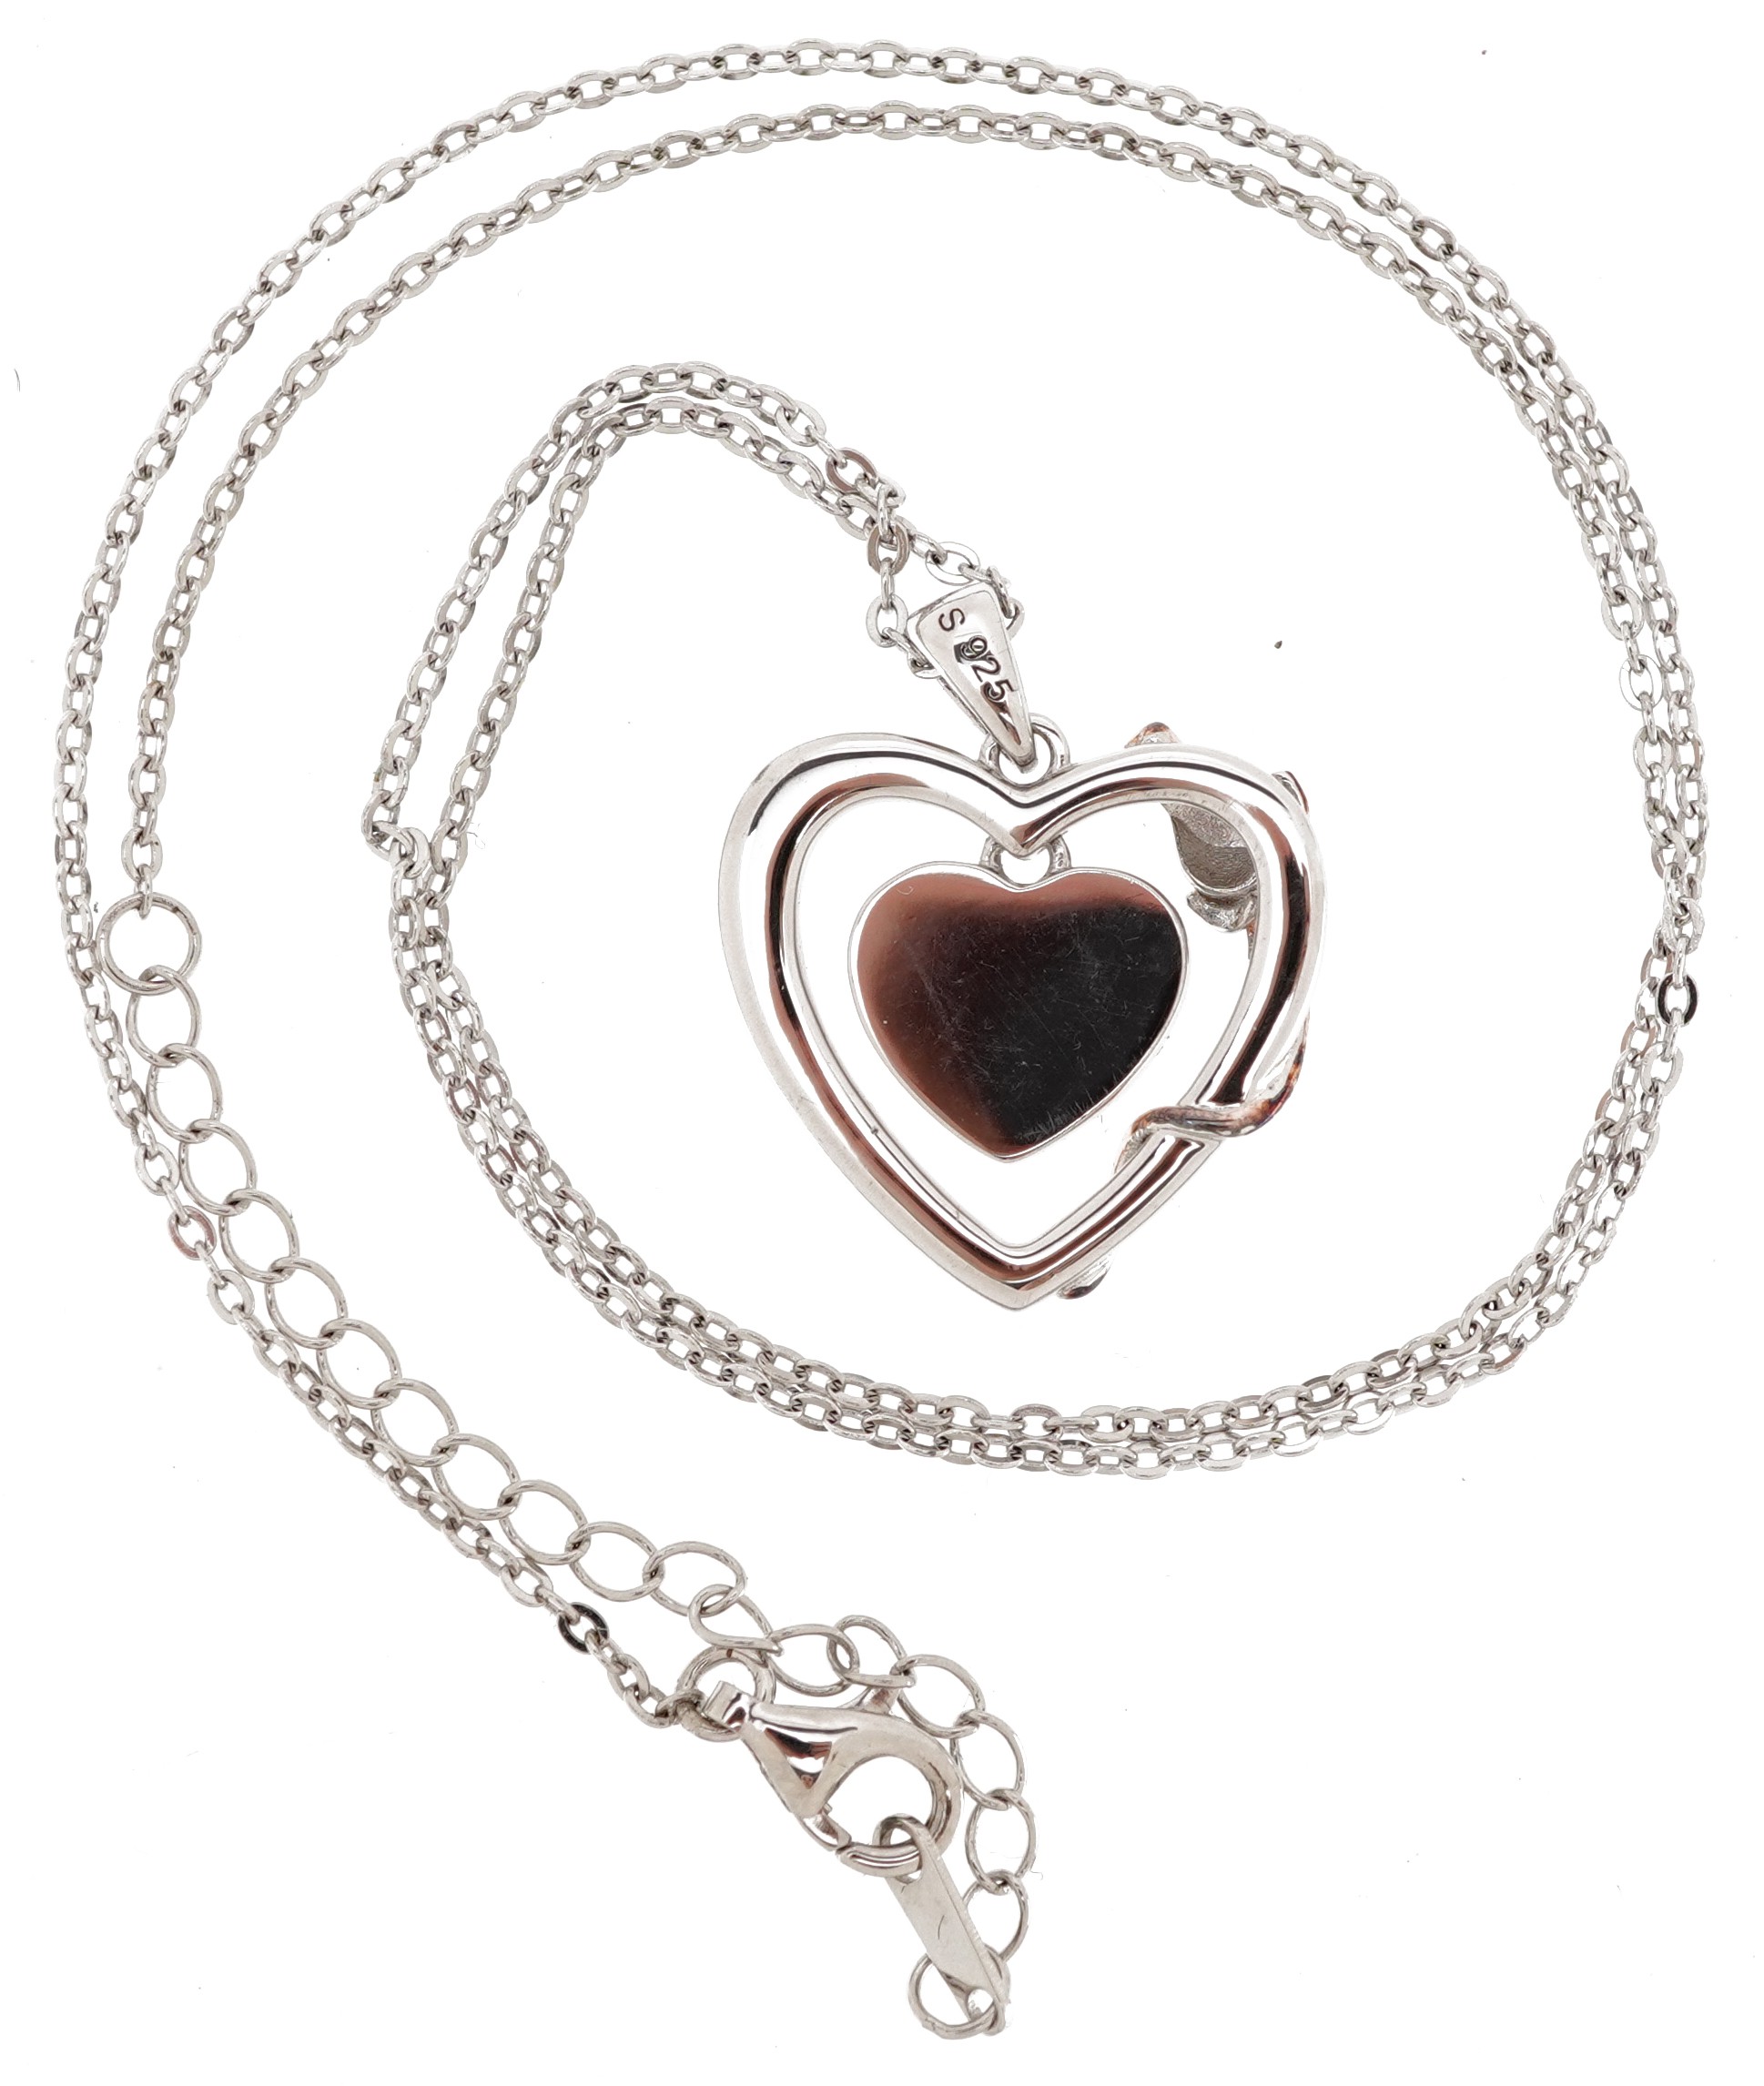 Silver and gold crystal love heart pendant engraved Always in My Heart, on a silver necklace, 2. - Image 3 of 5